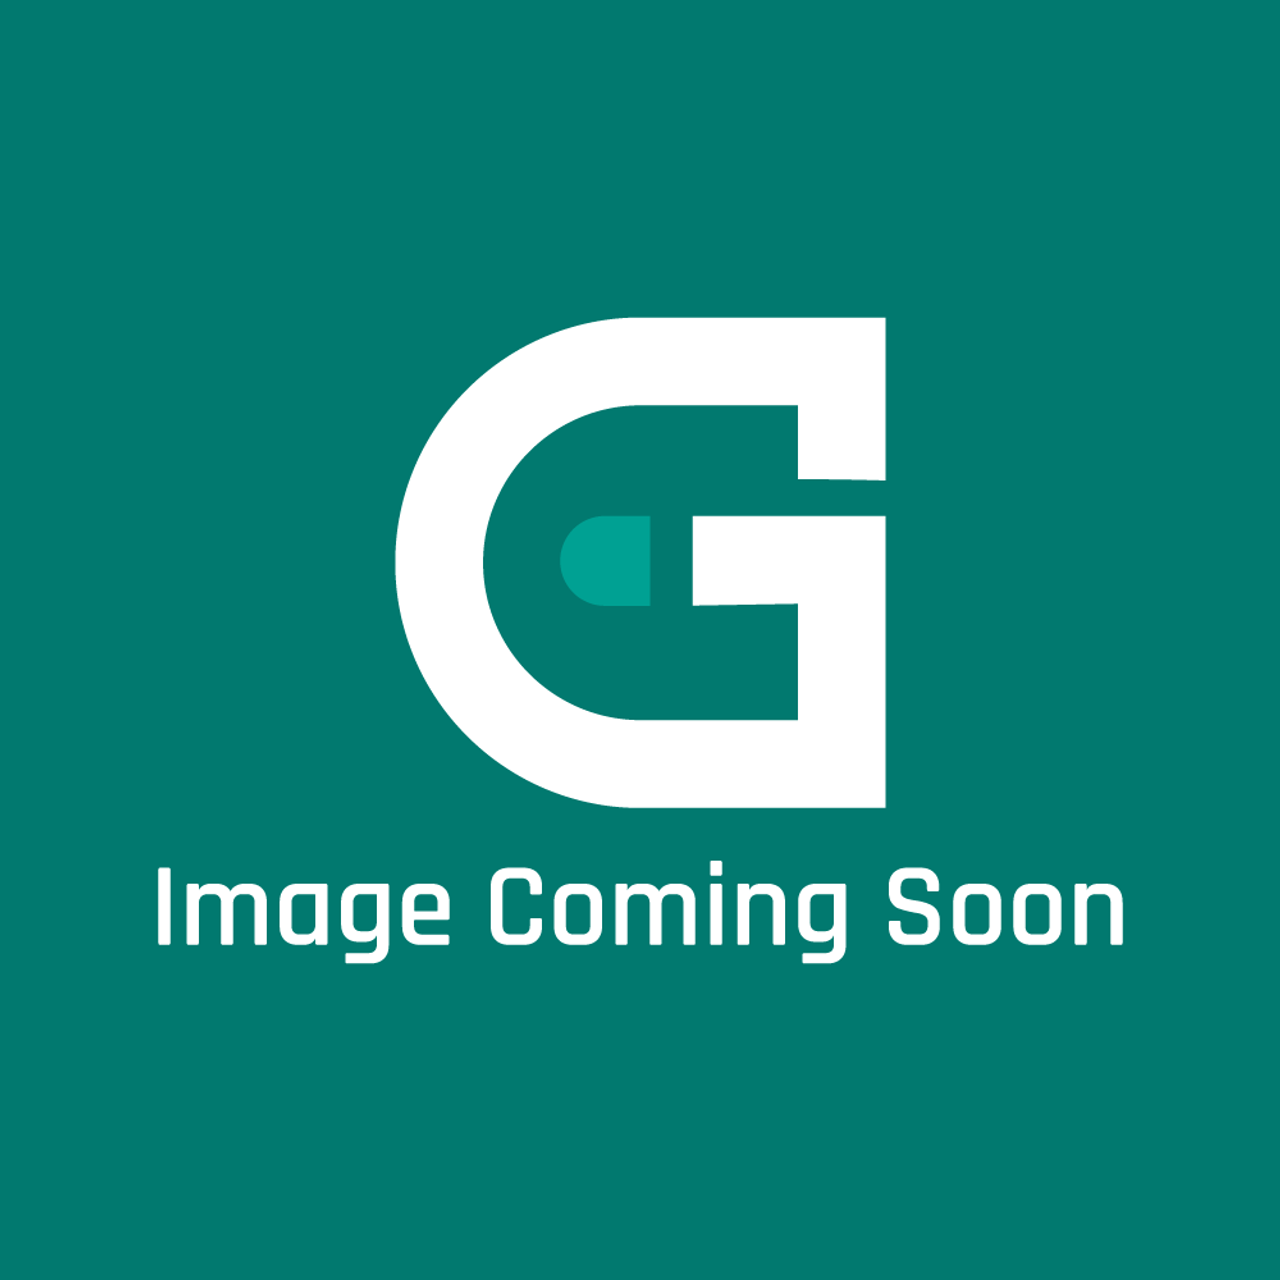 Frigidaire - Electrolux 242159201 Cover - Image Coming Soon!